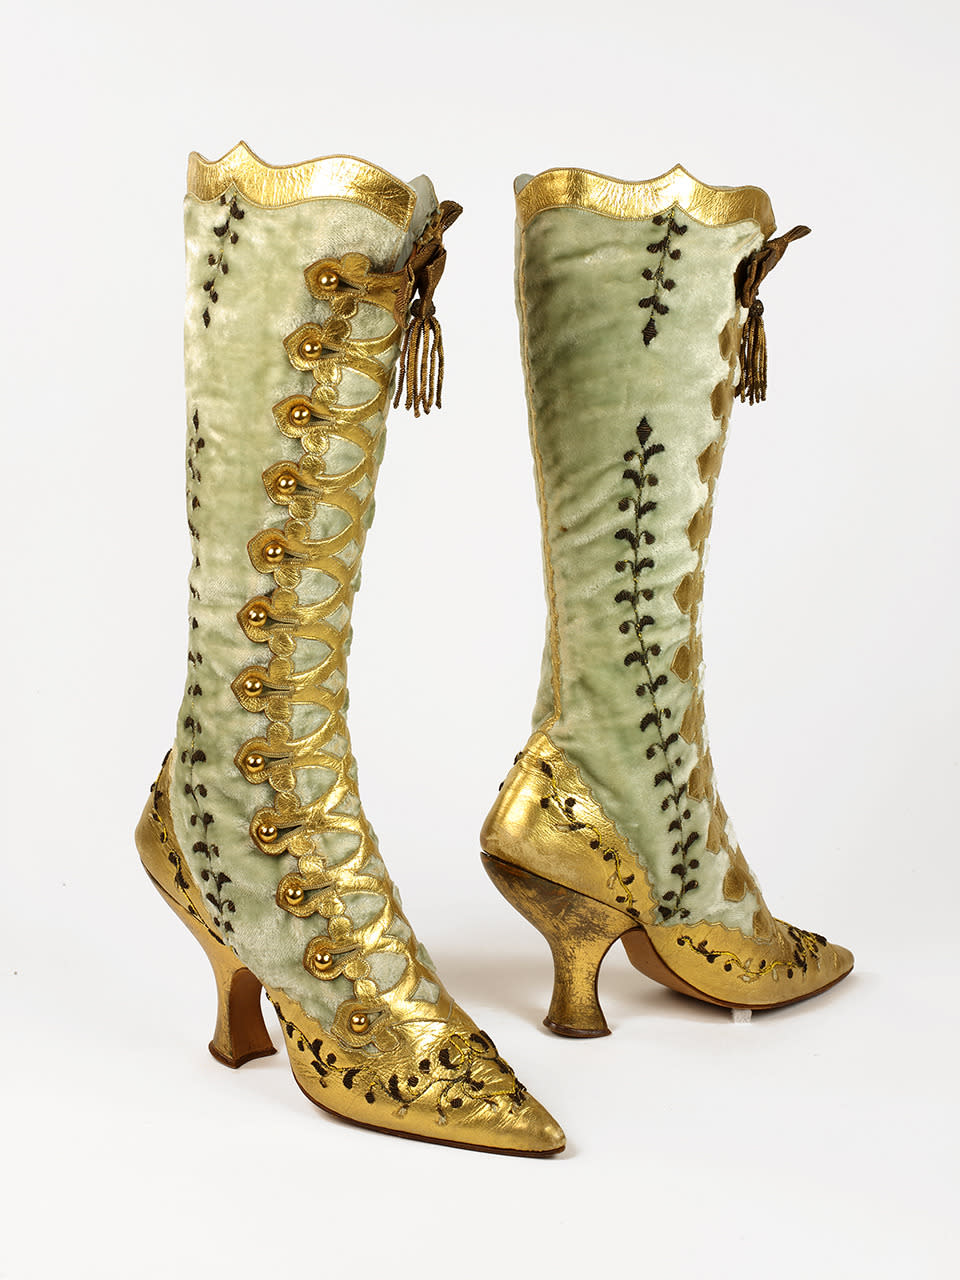 19th century gold button boots at the Bata Shoe Museum